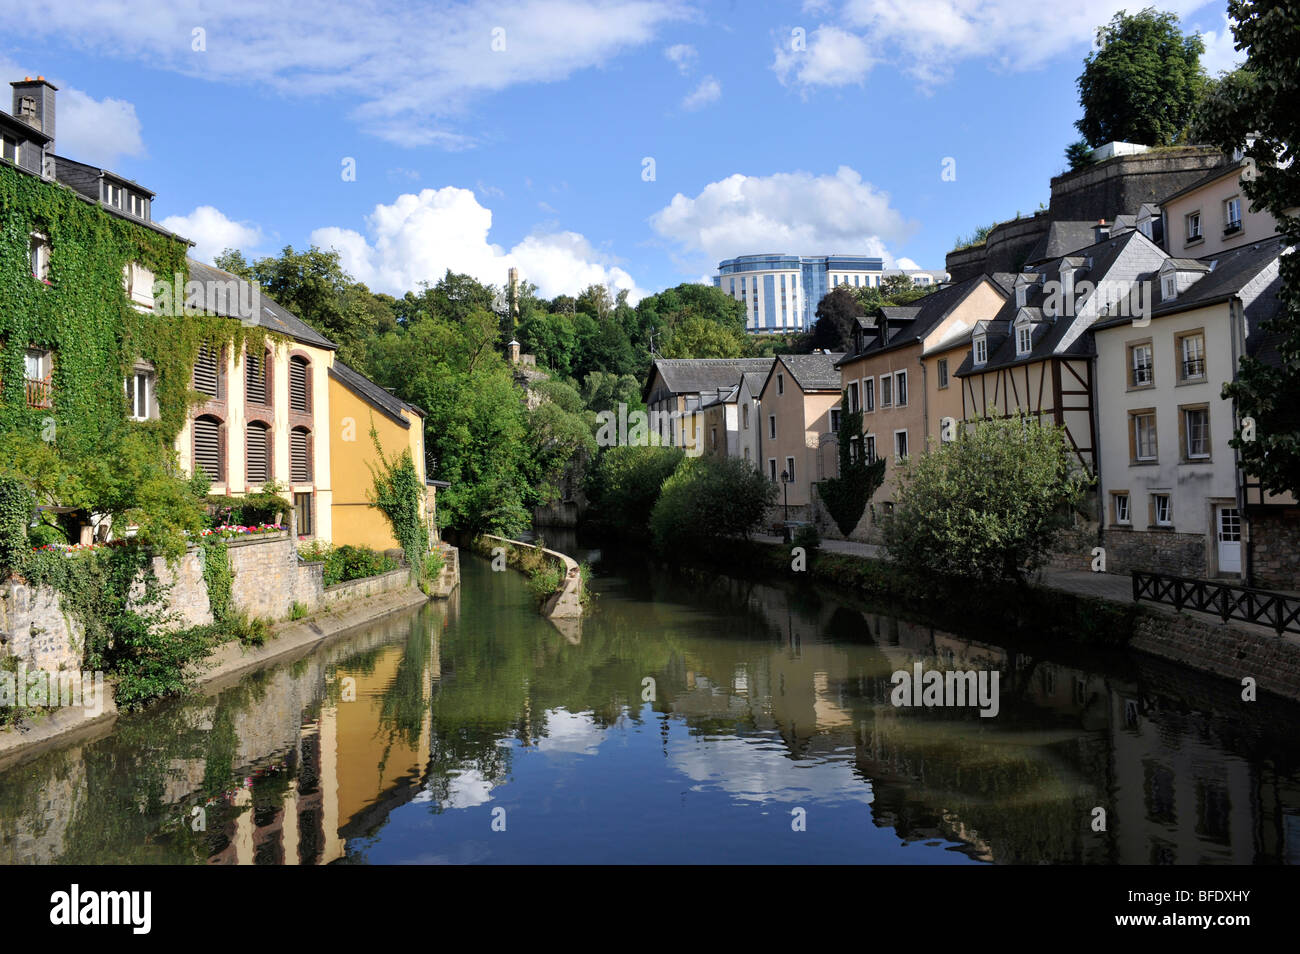 River Aizette flows through the Old Town, City of Luxembourg, Europe. Stock Photo